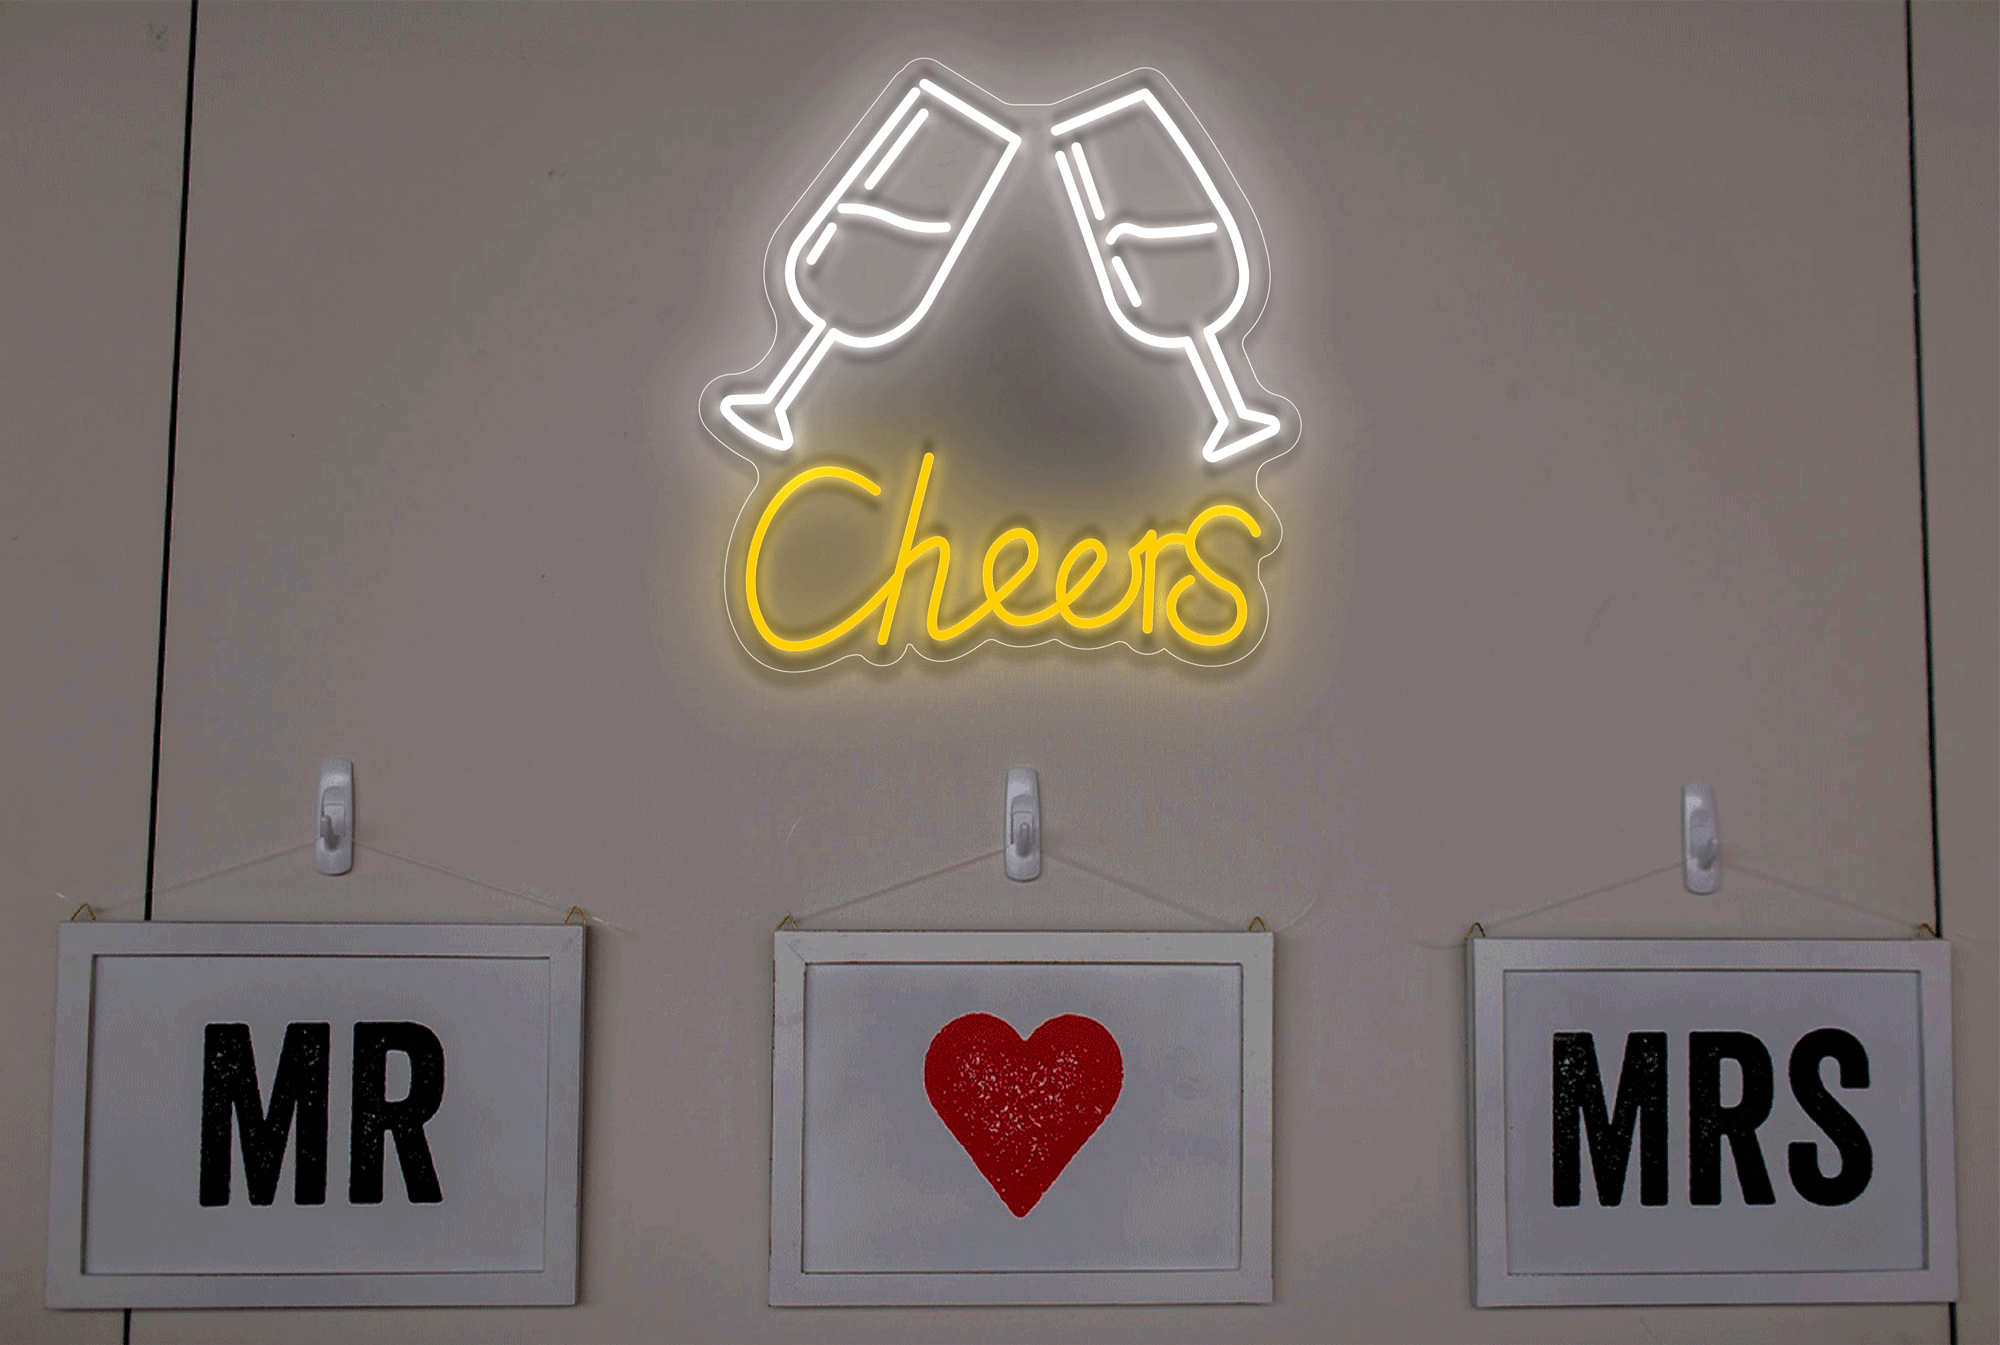 "Cheers" with 2 Glasses LED Neon Sign